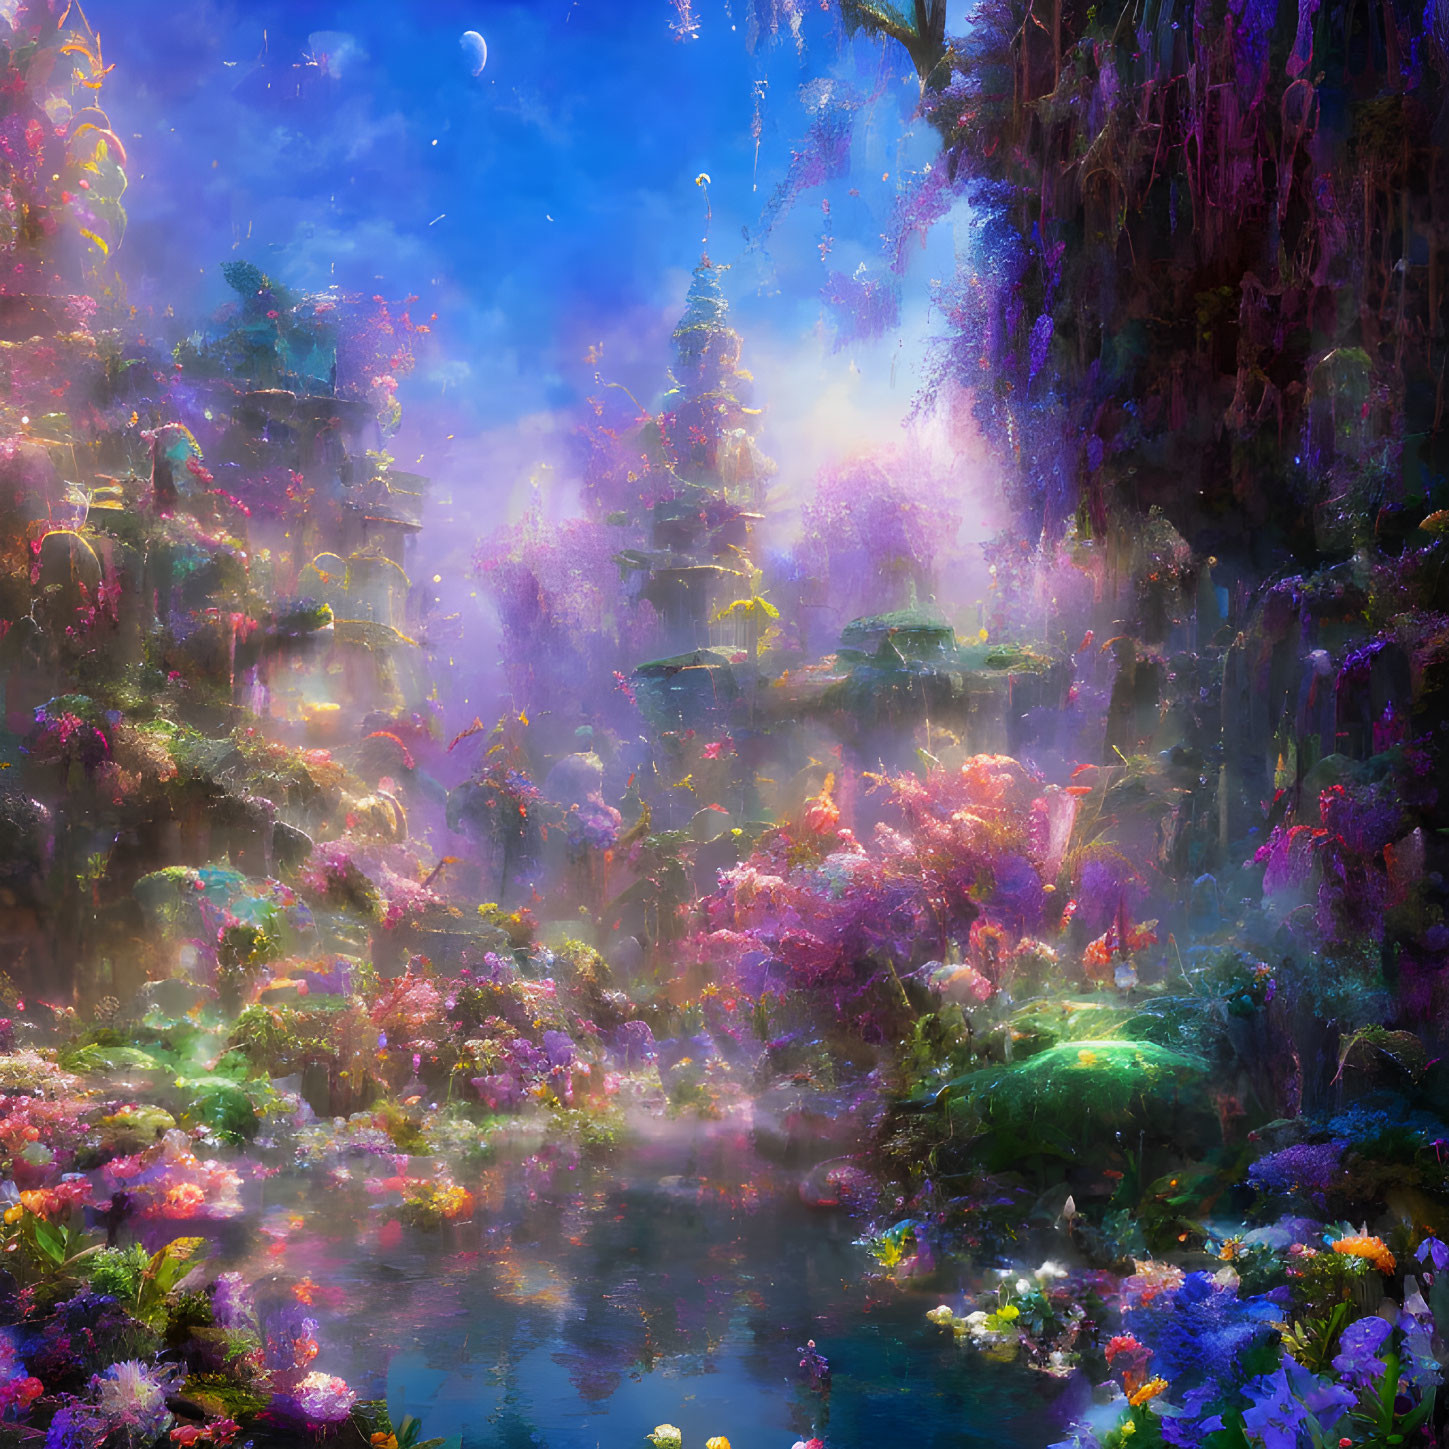 Vivid mystical forest scene with colorful flora and ethereal light